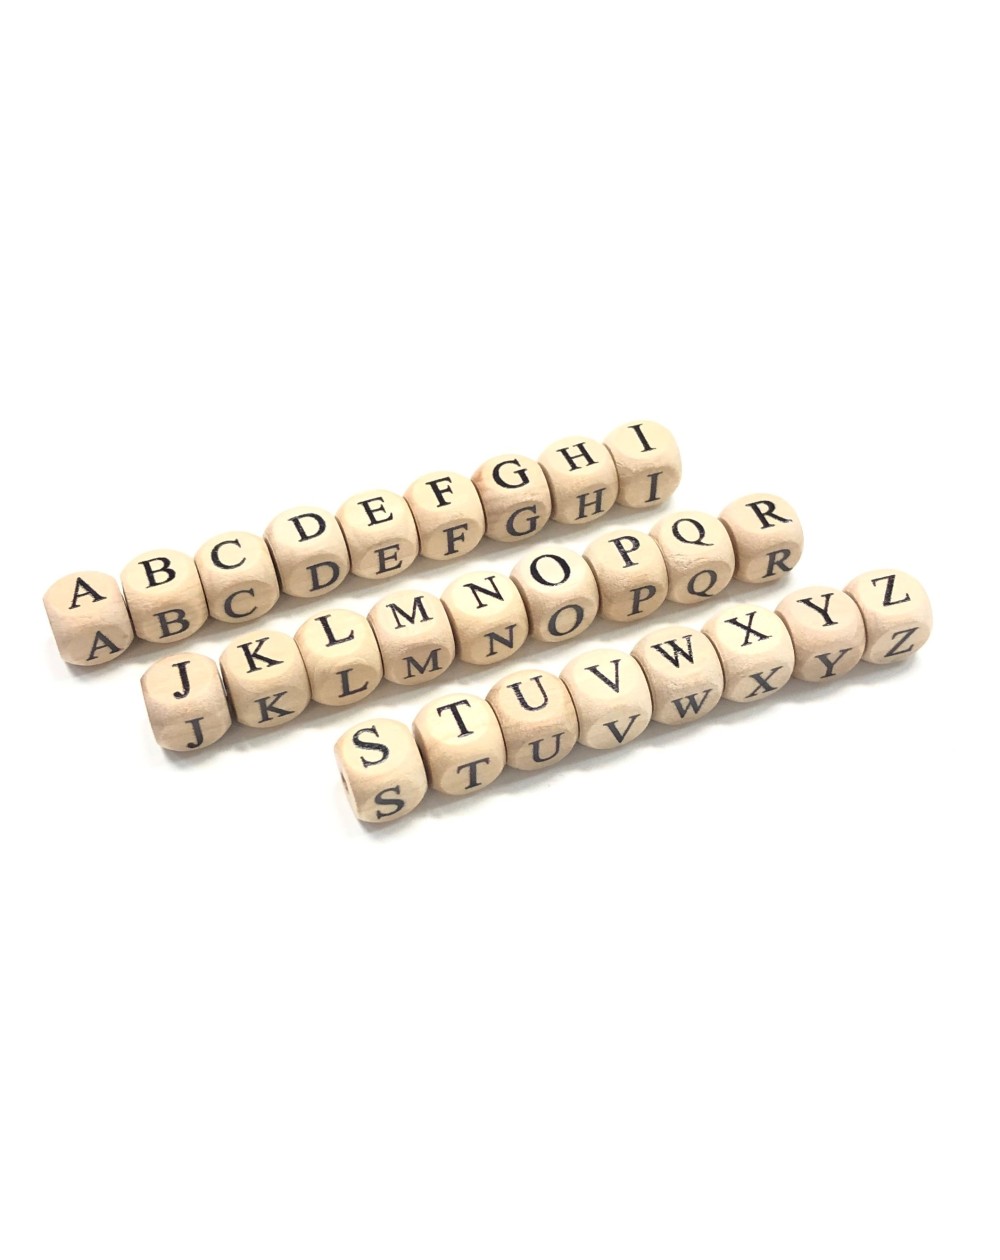 WOOD LETTER CUBES PRINTED